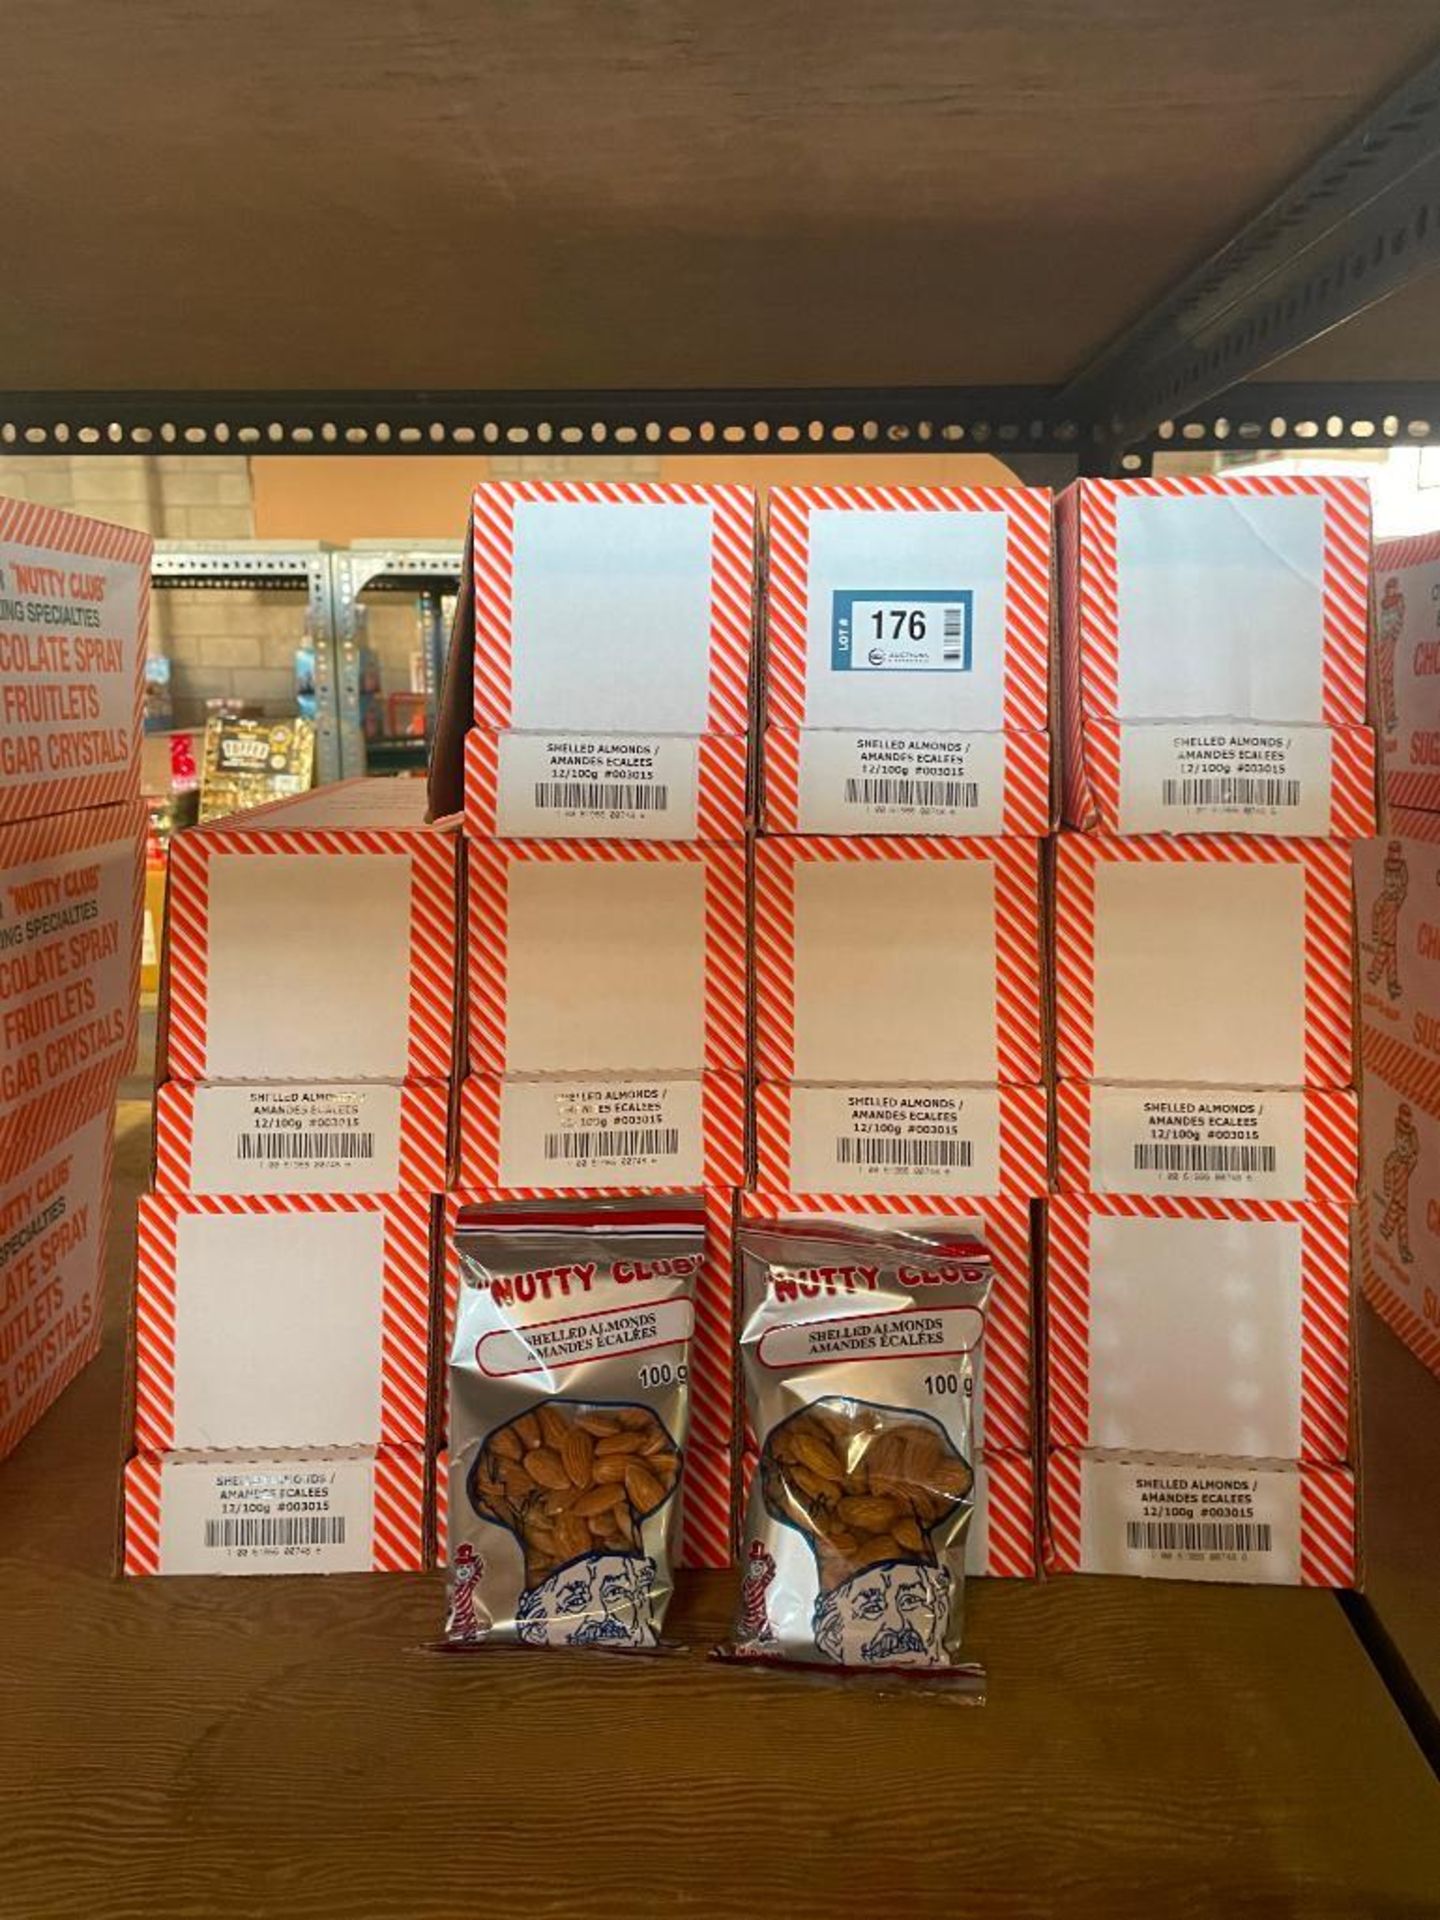 (11) BOXES OF NUTTY CLUB SHELLED ALMONDS, 12/100G BAGS PER BOX